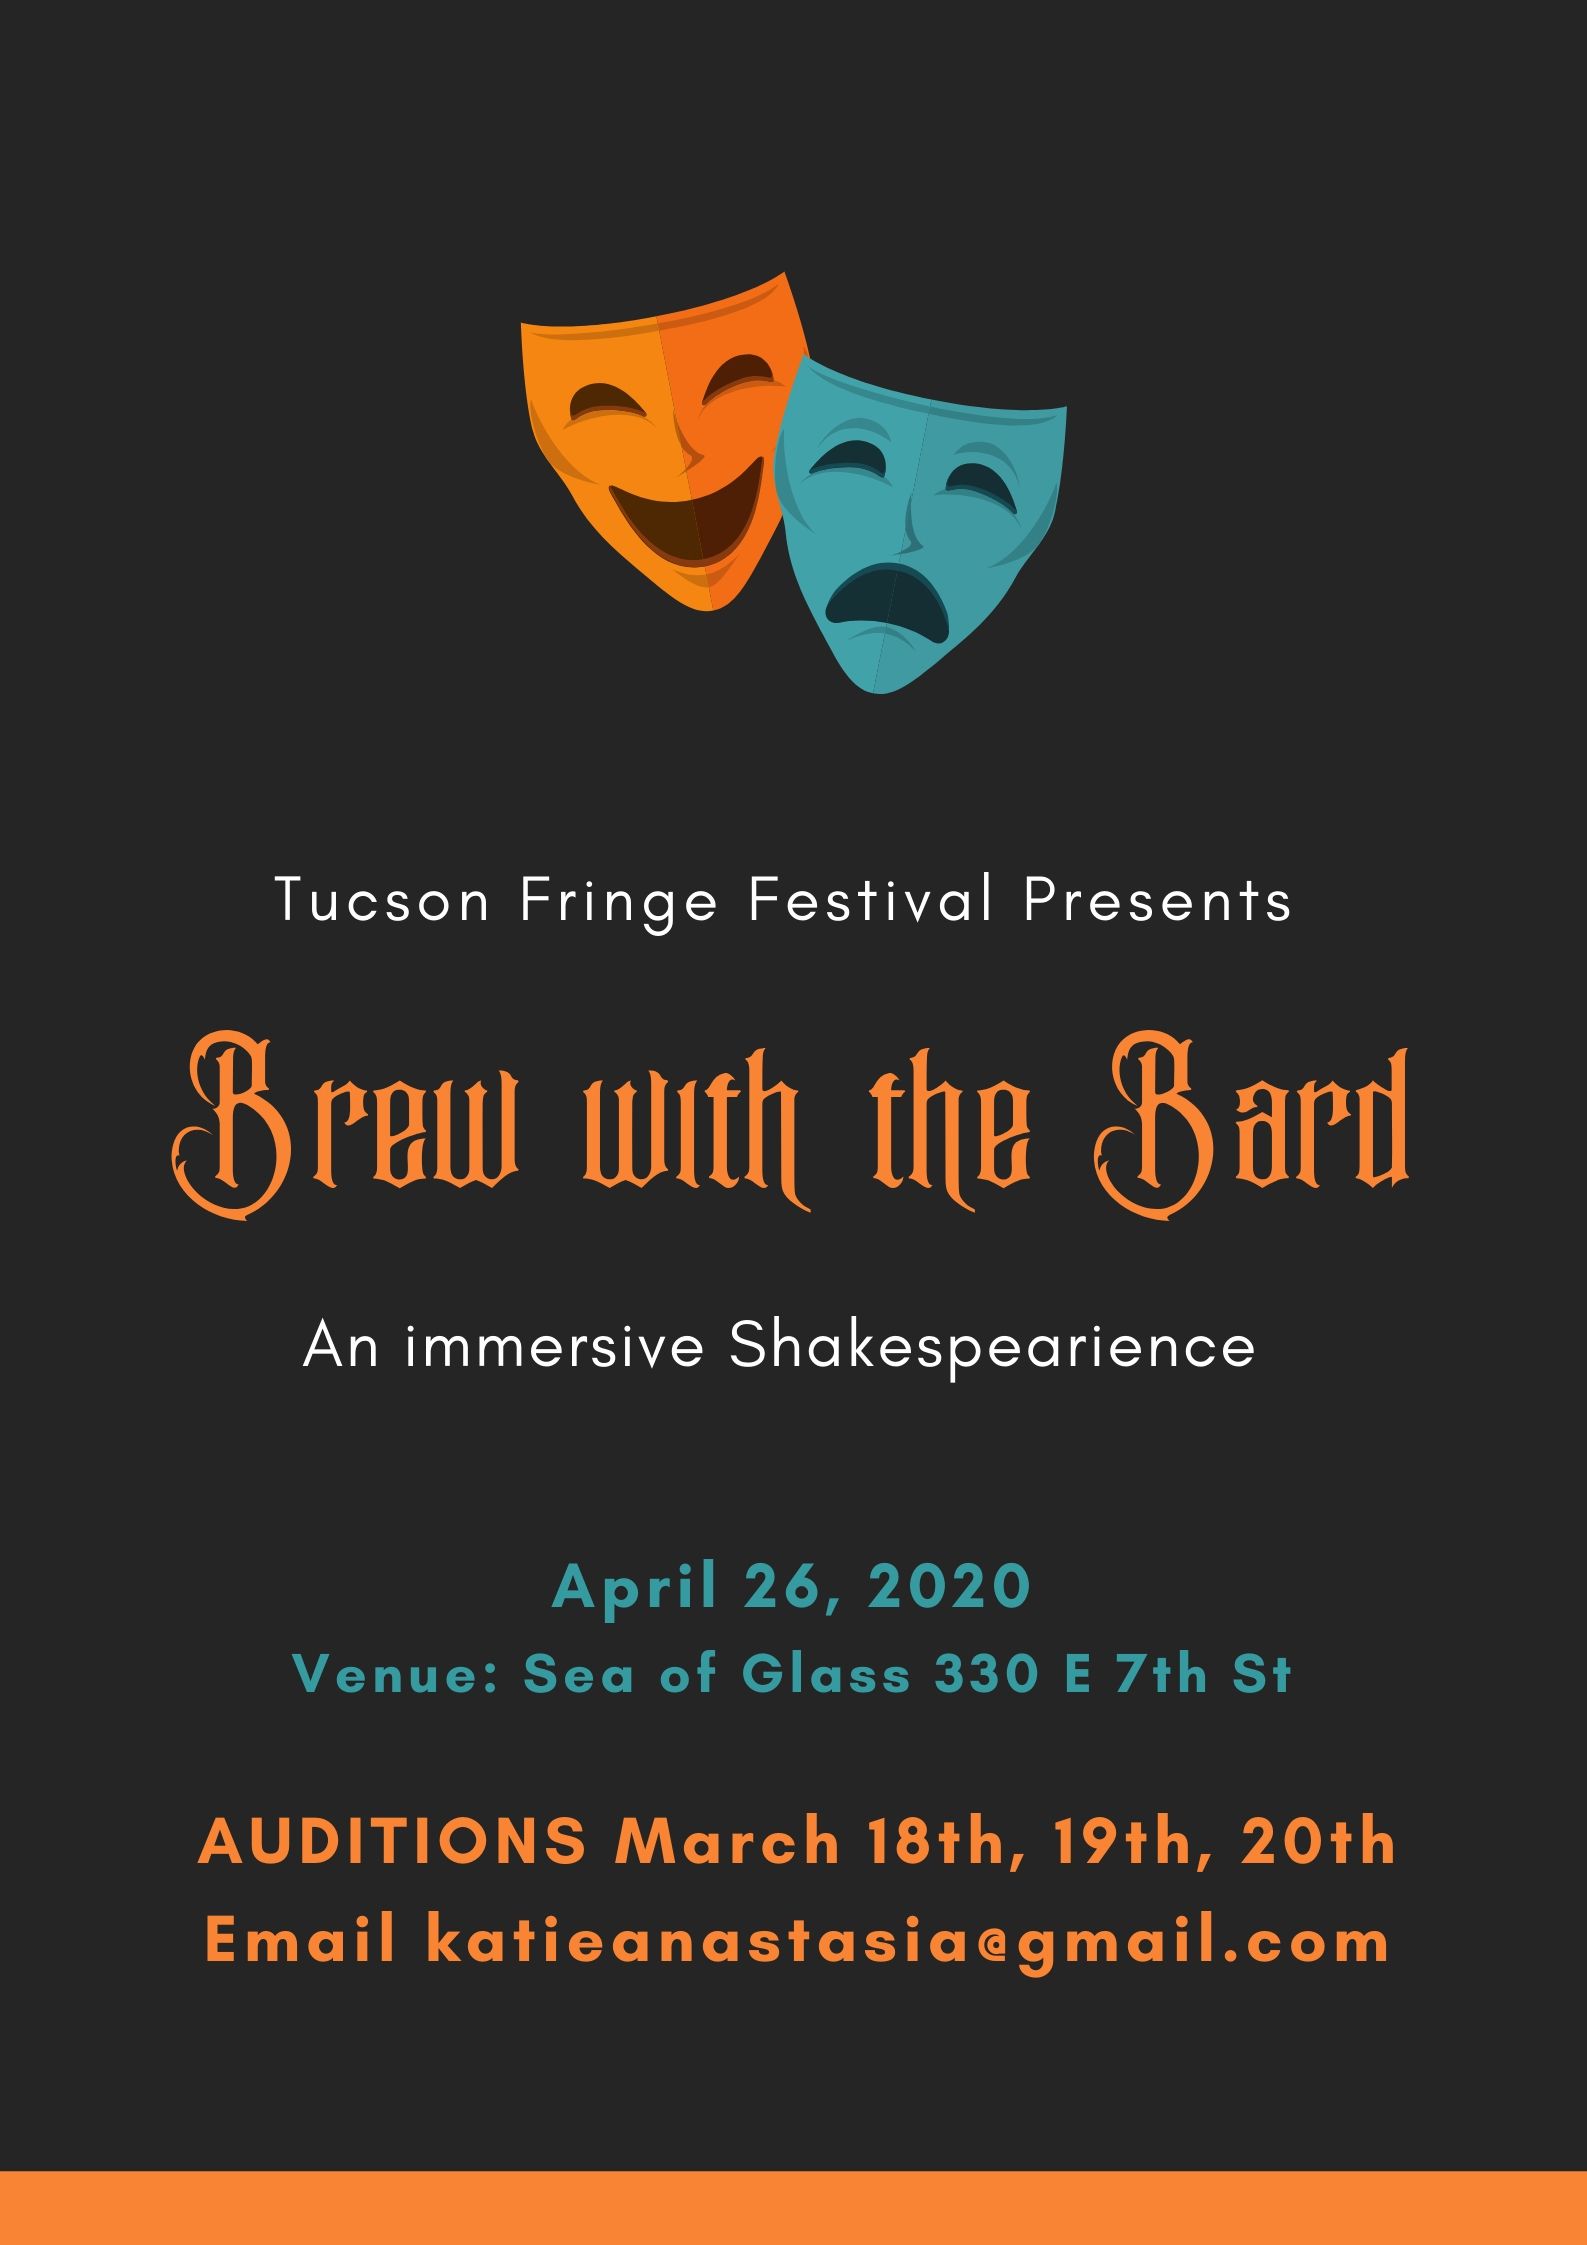 Announcing: 6th Annual “Brew with the Bard” Event – Tucson Fringe